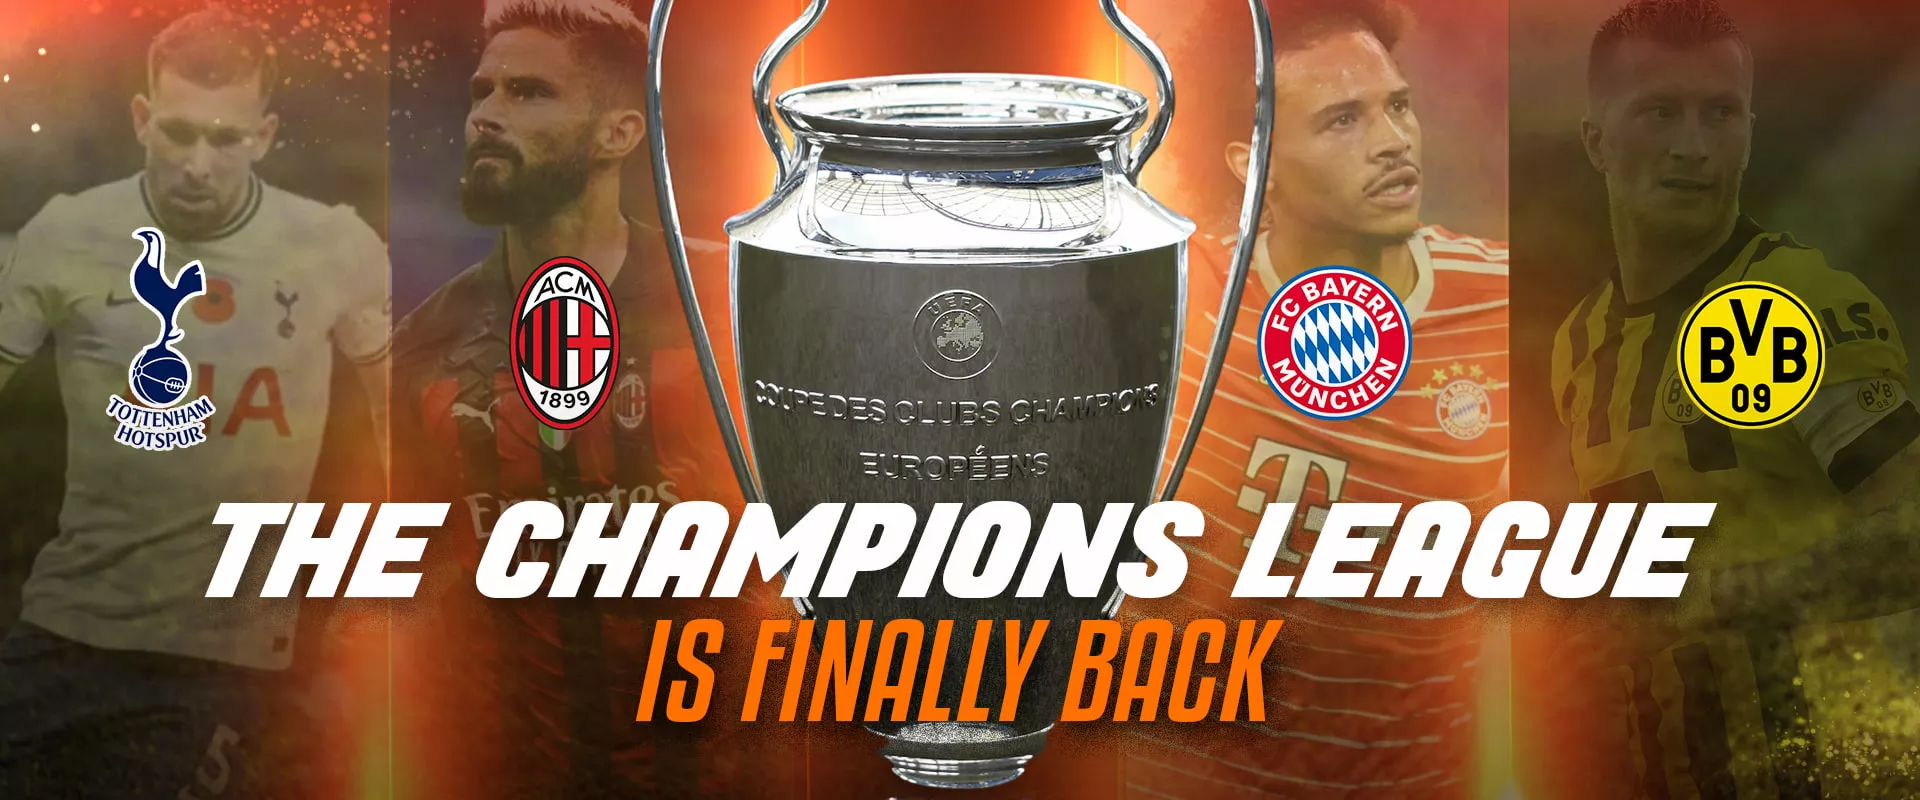 The Champions League is Finally Back - Pro Jersey Shop